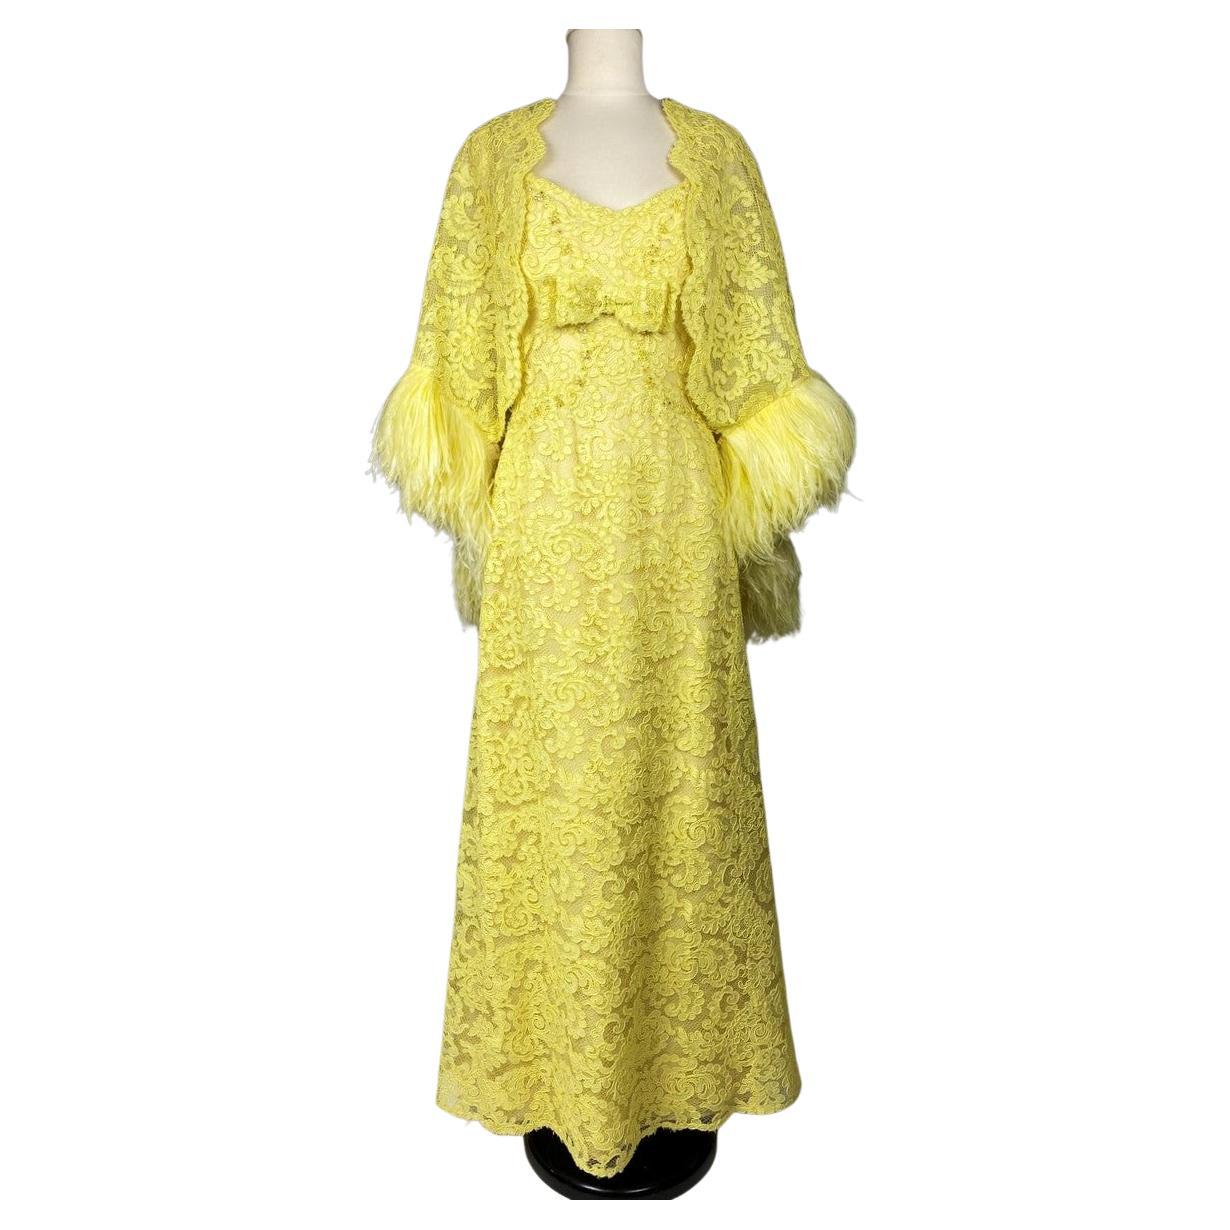 A Yellow Lace Dress with Ostrich Feathers by Jacques Heim Couture Circa 1965 For Sale